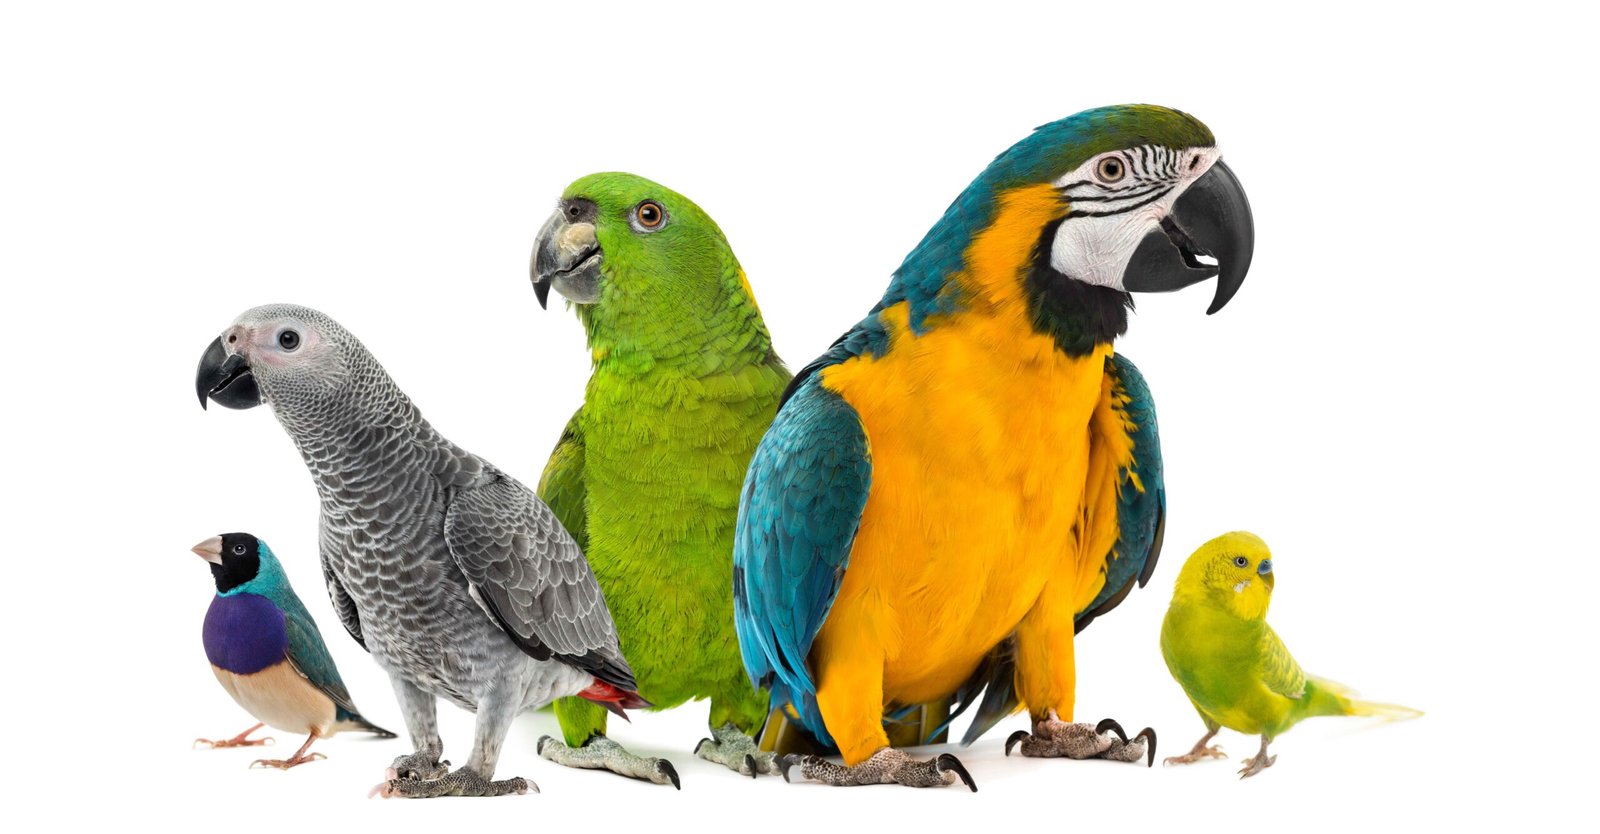 The 7 most popular birds as pets